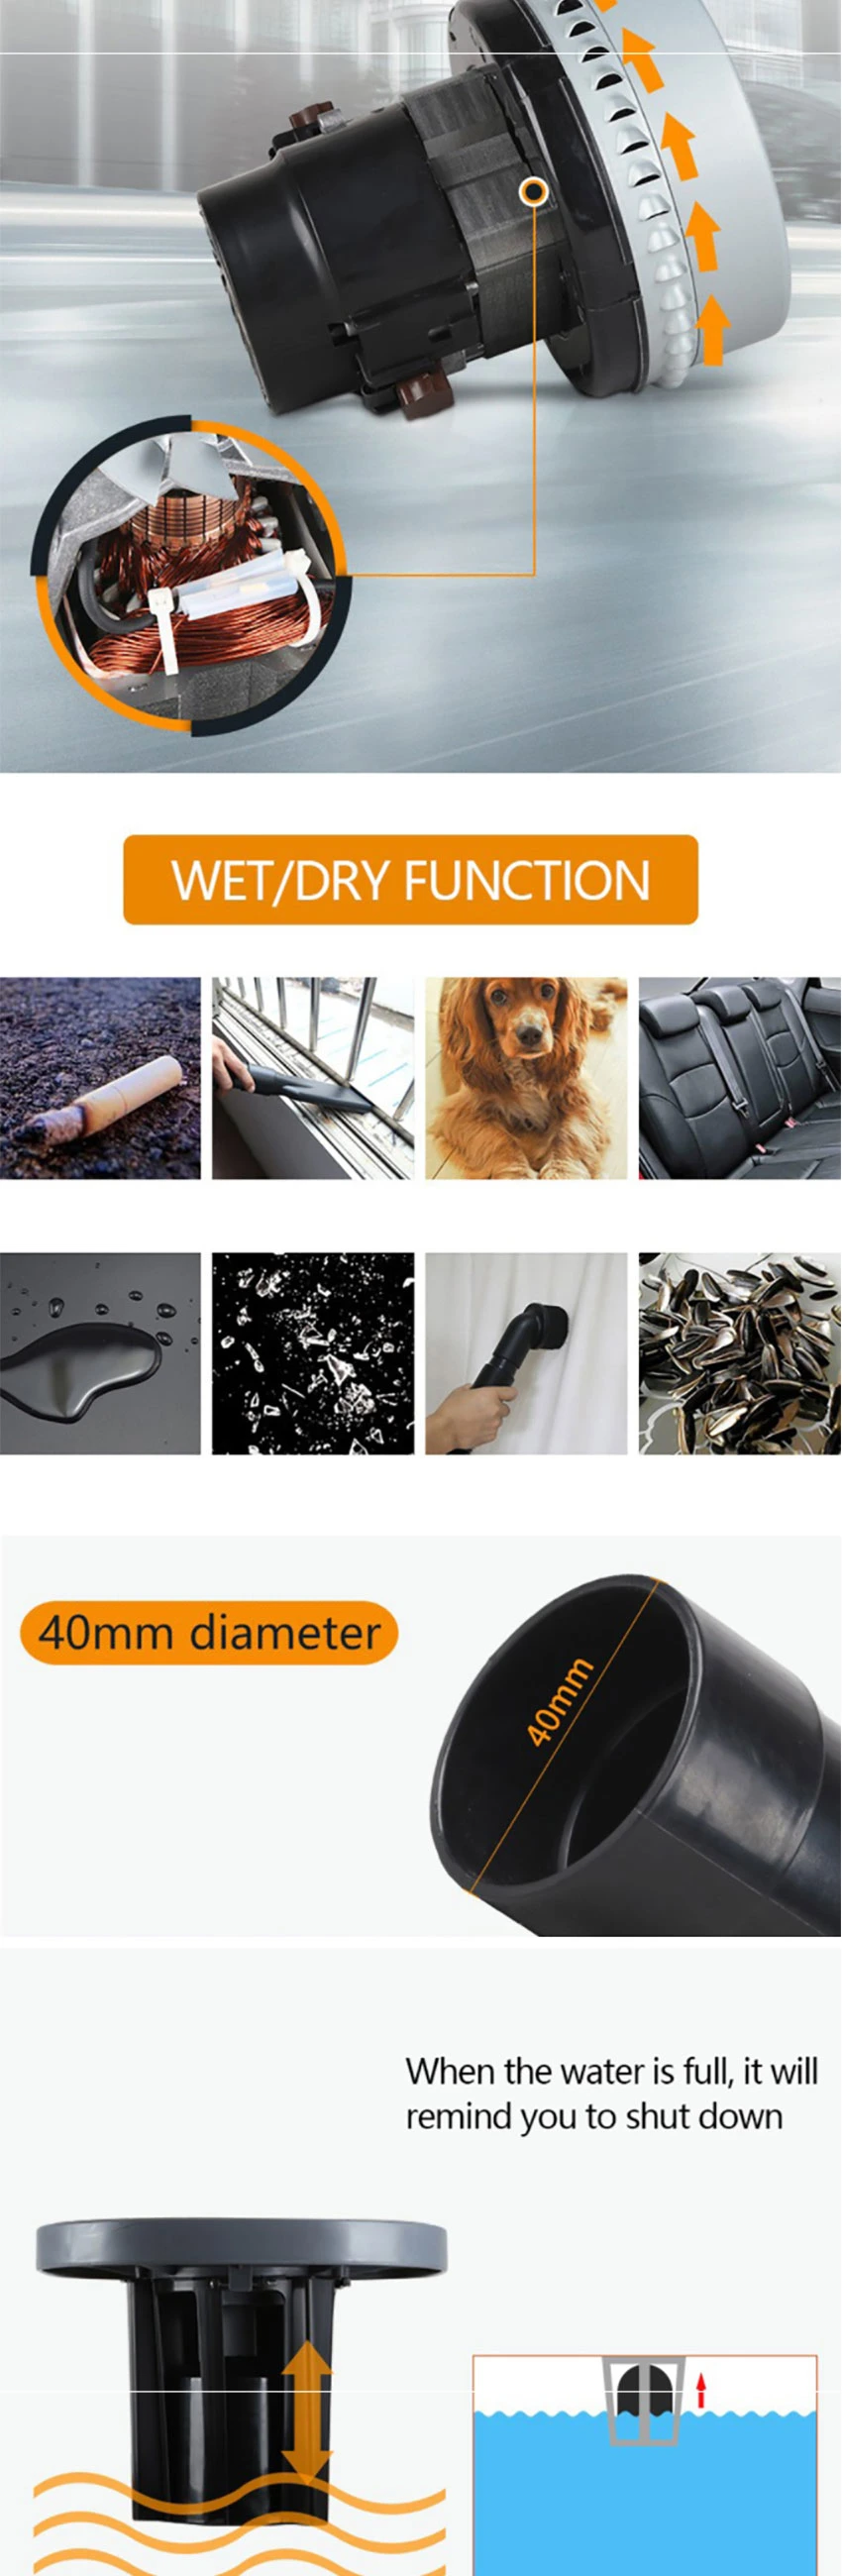 Stainless Steel Wet and Dry 70L Vacuum Cleaner Industrial Home Car Hoter Washer Vacuum Cleaner